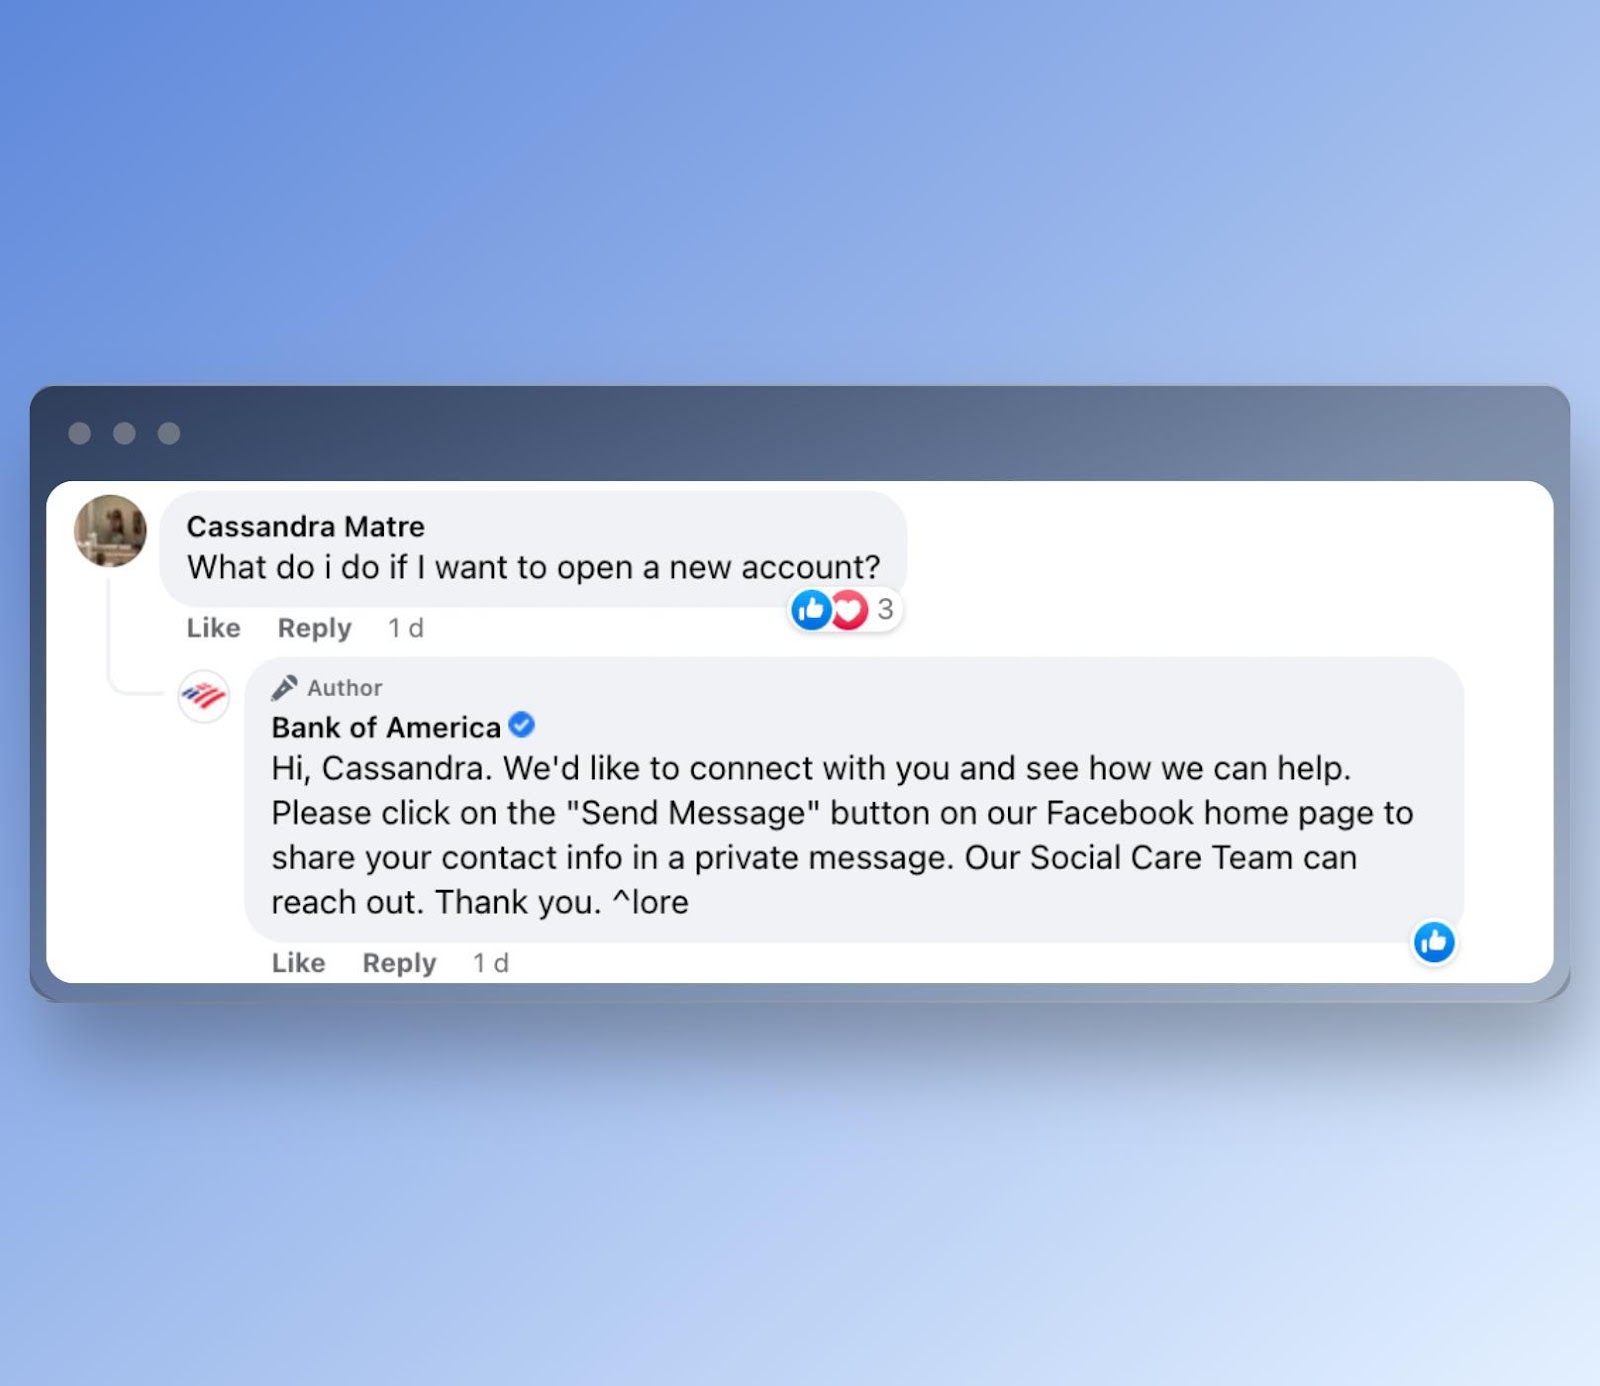 Bank of America’s reply to a comment on Facebook